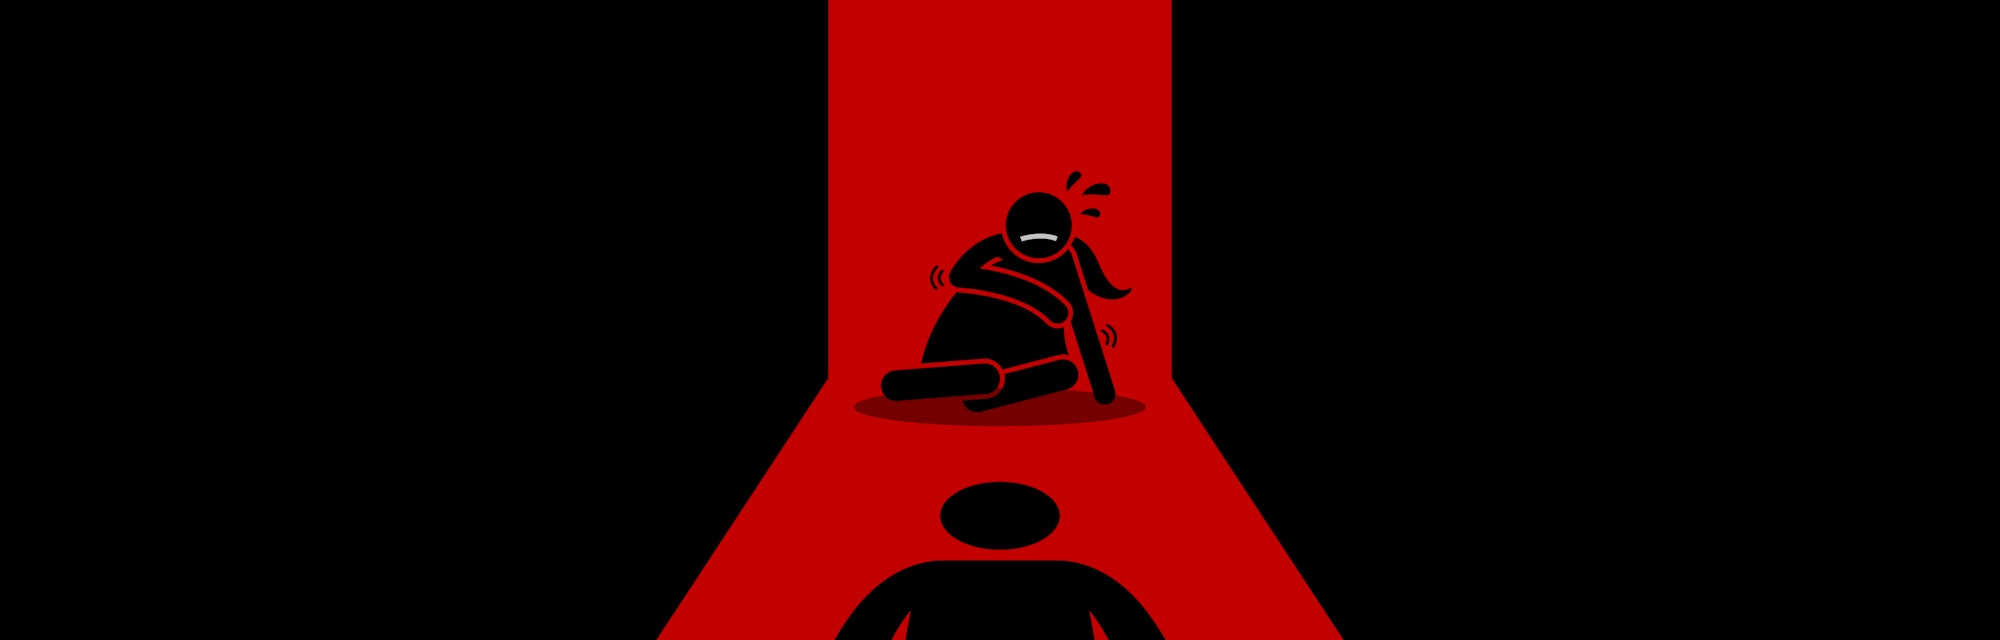 Abusive husband beating his wife. Vector artwork depicts domestic problem, exploitation of women, se...